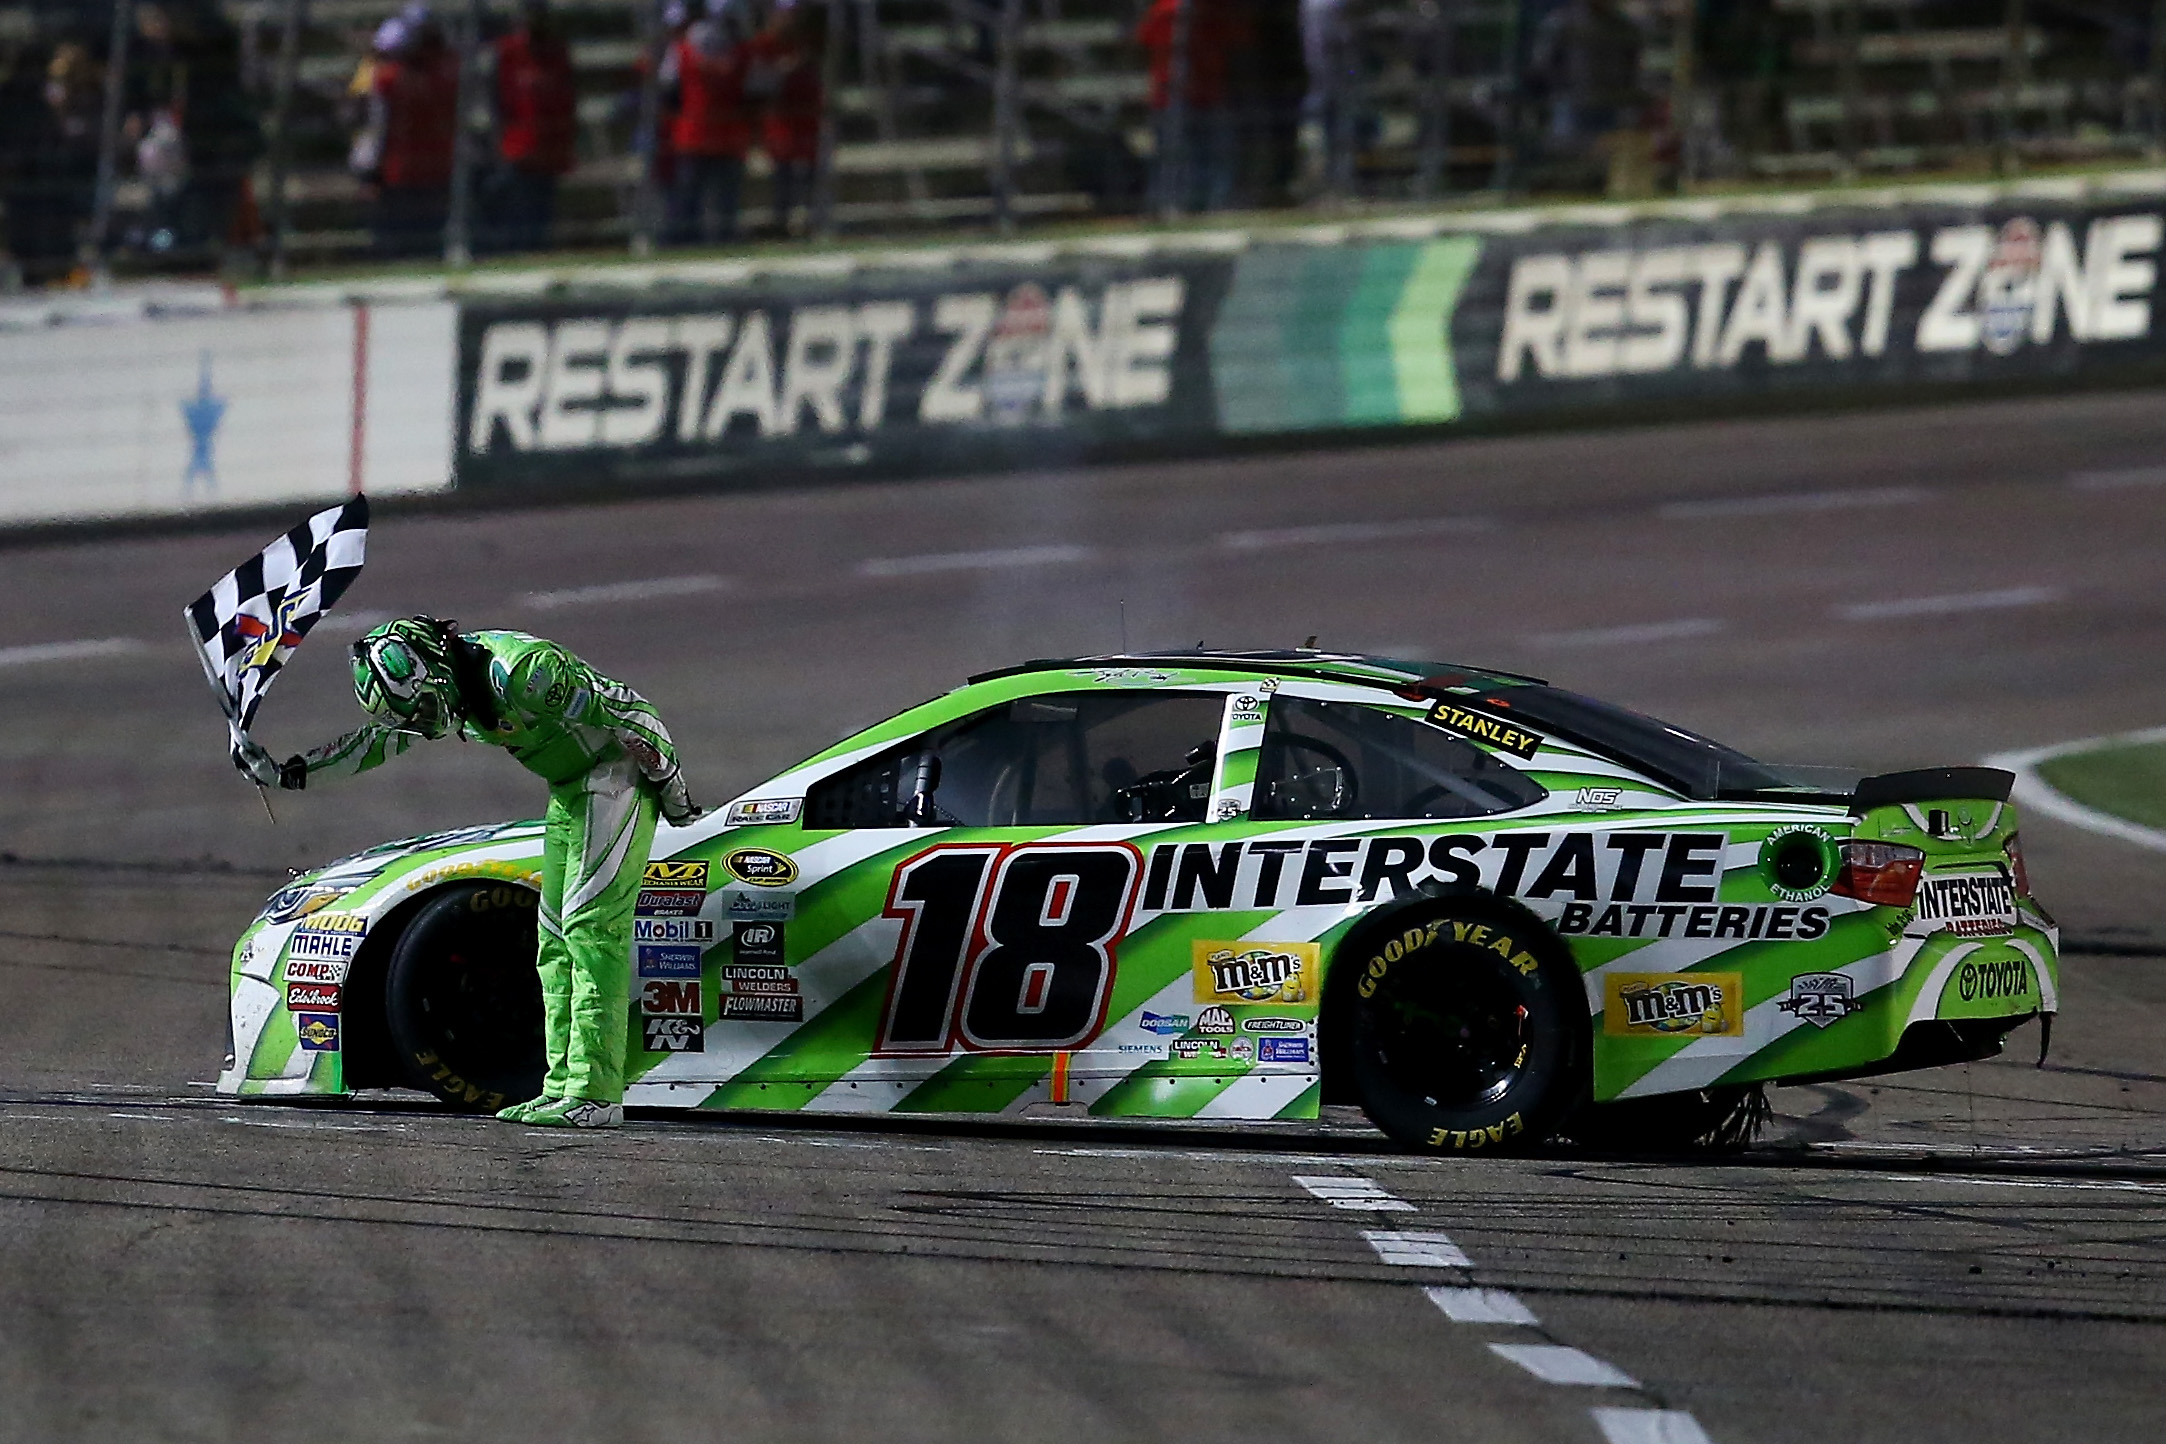 Busch Wins Texas - Late Race Wreck Takes Out 13